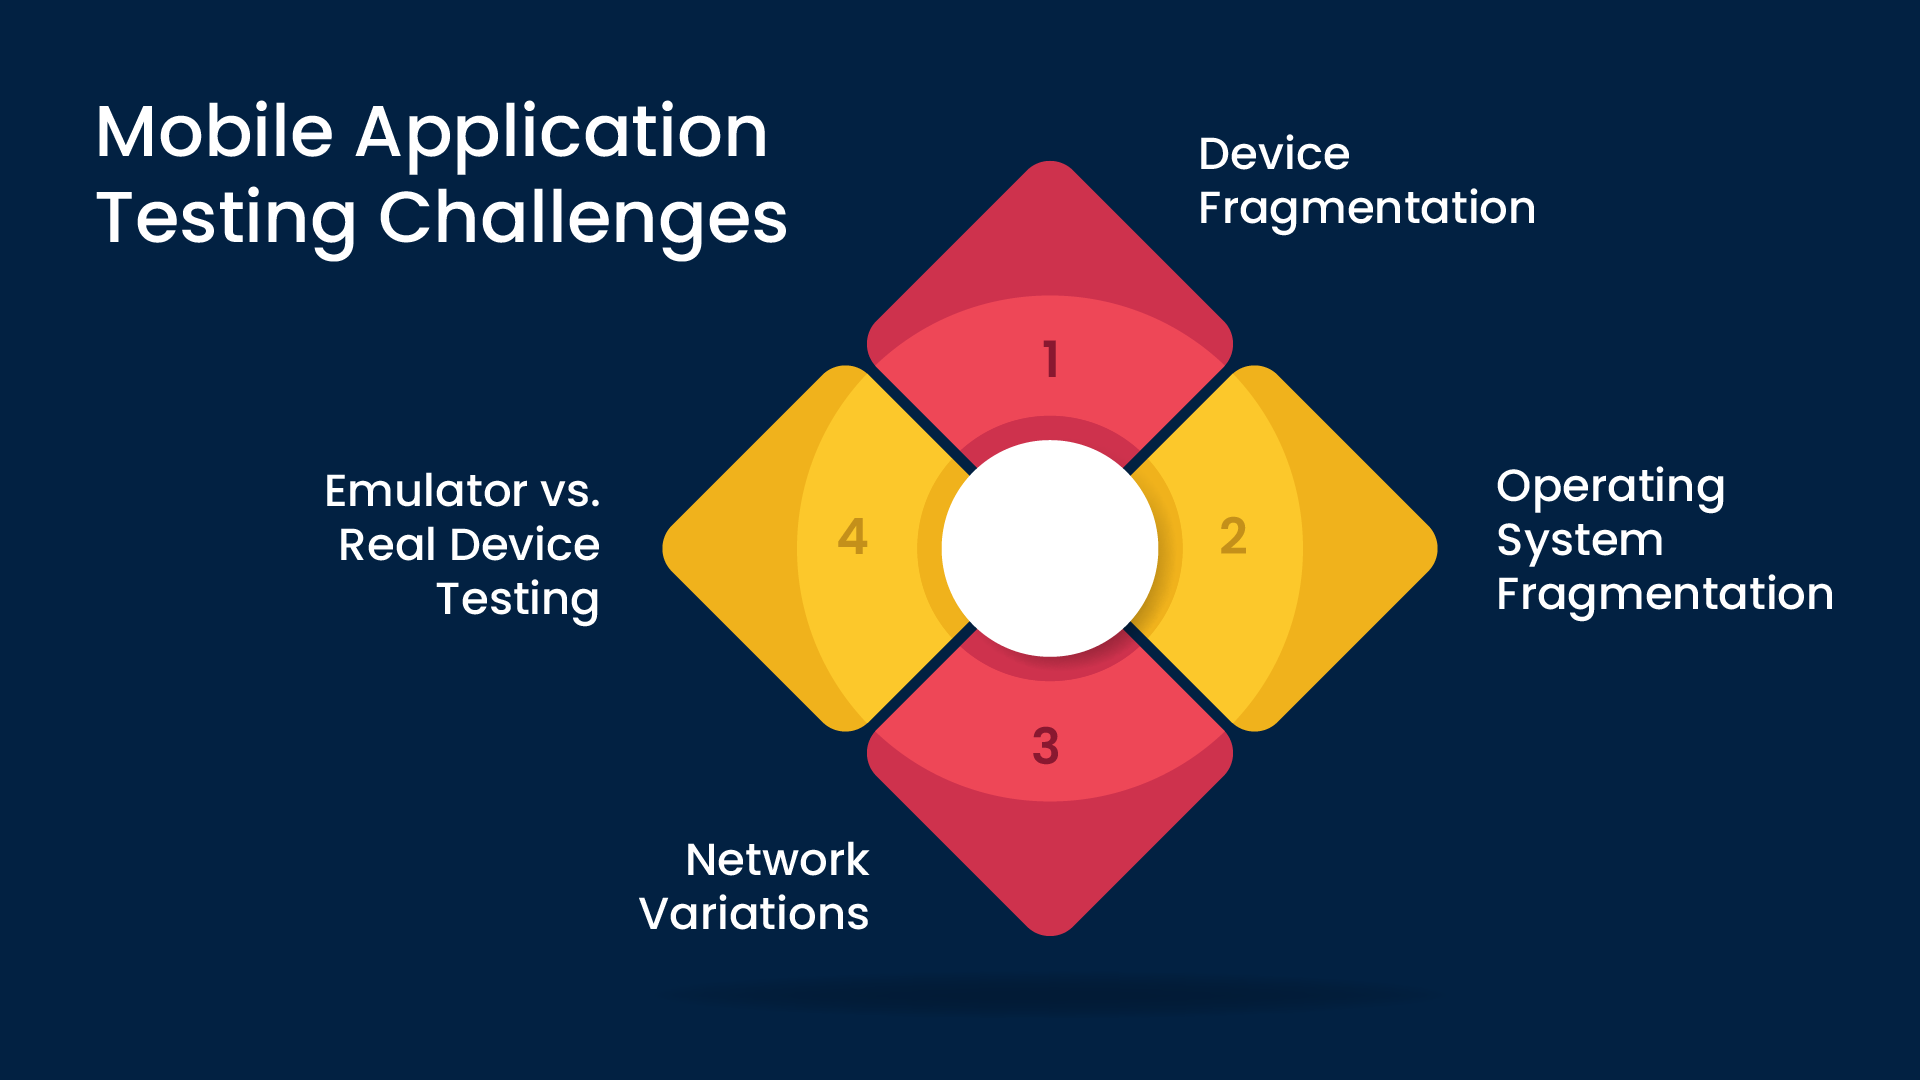 Mobile application testing challenges